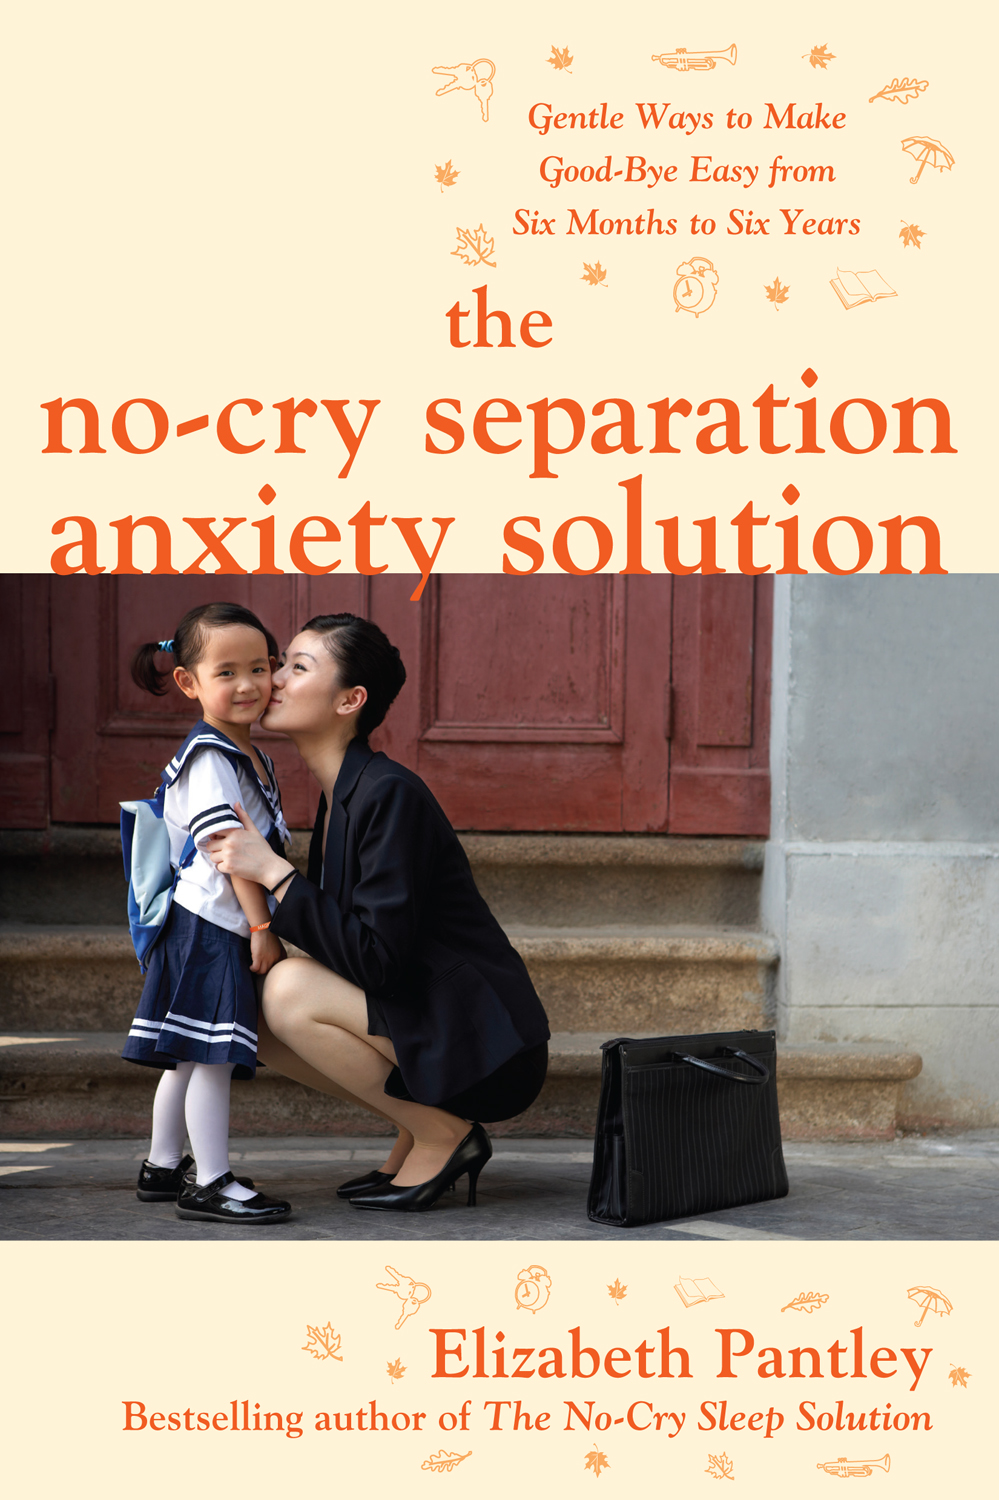 The No-Cry Separation Anxiety Solution - 15-24.99